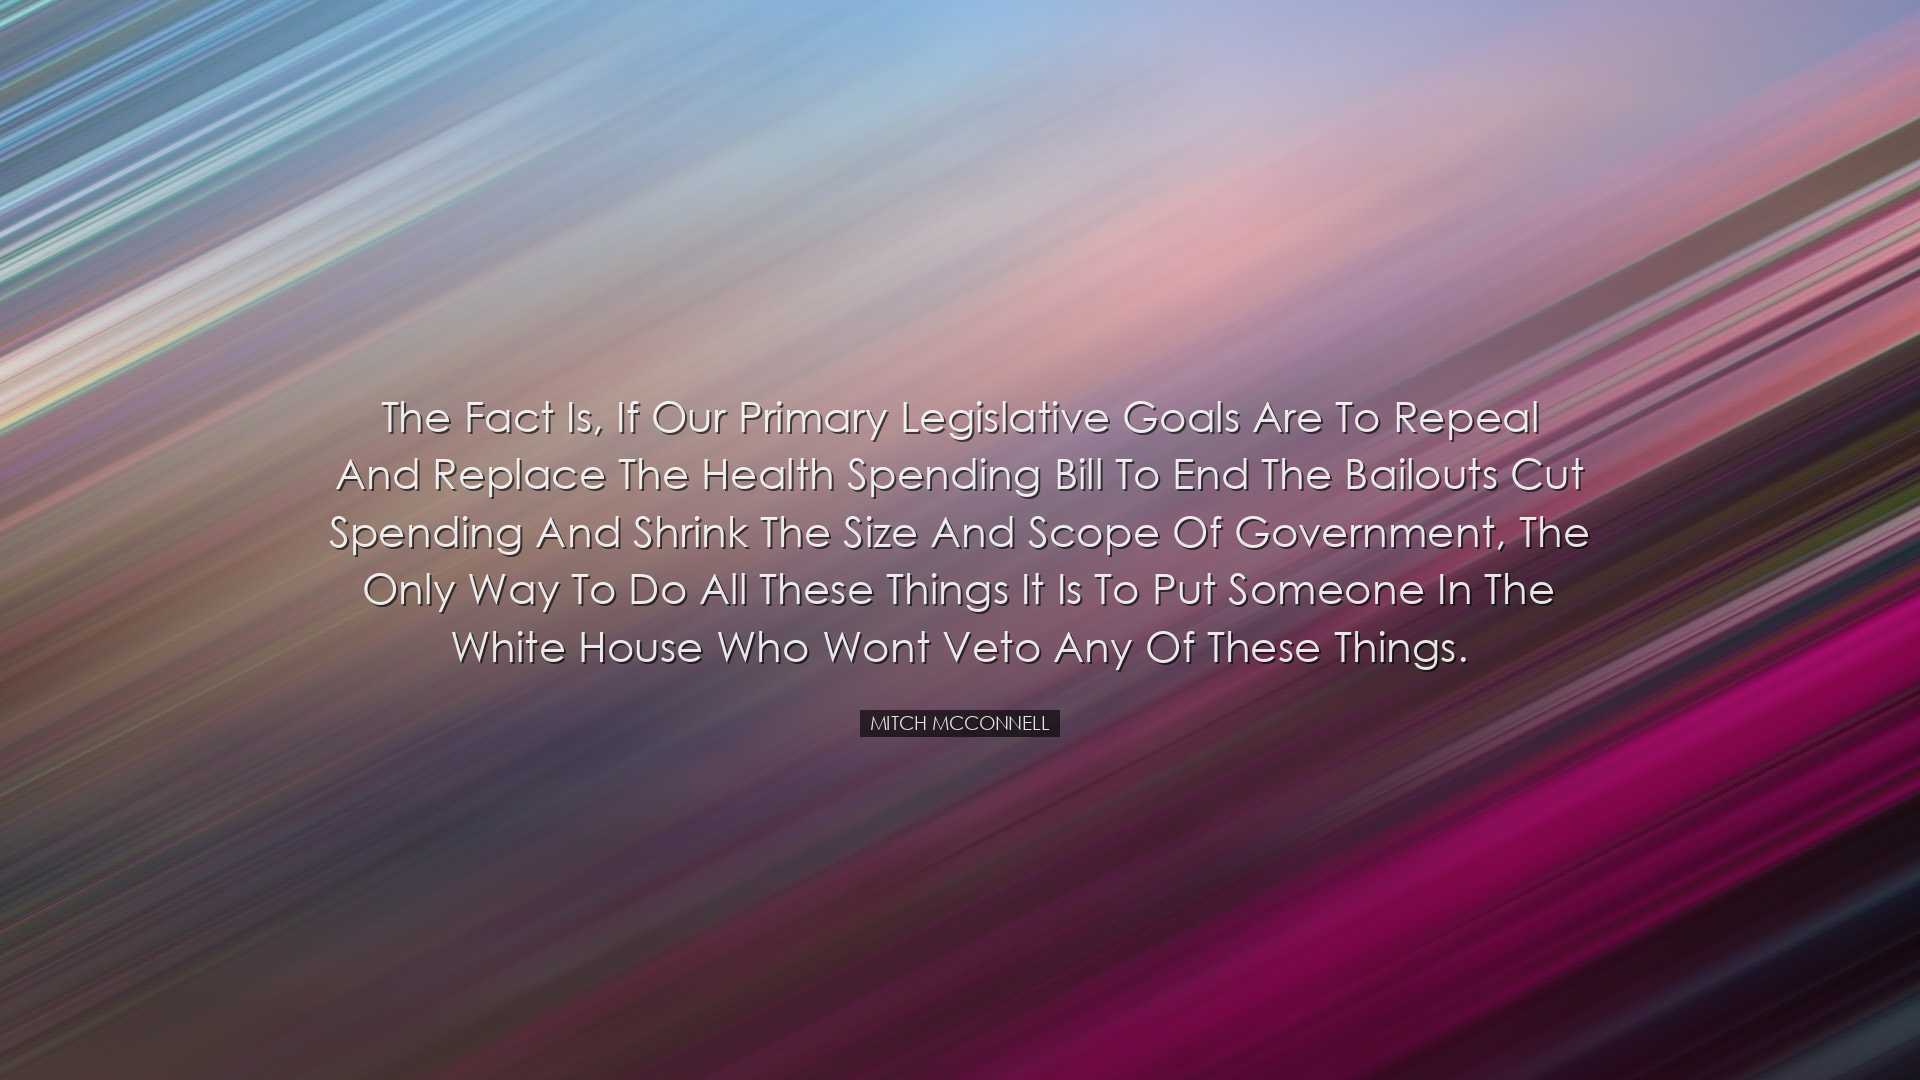 The fact is, if our primary legislative goals are to repeal and re